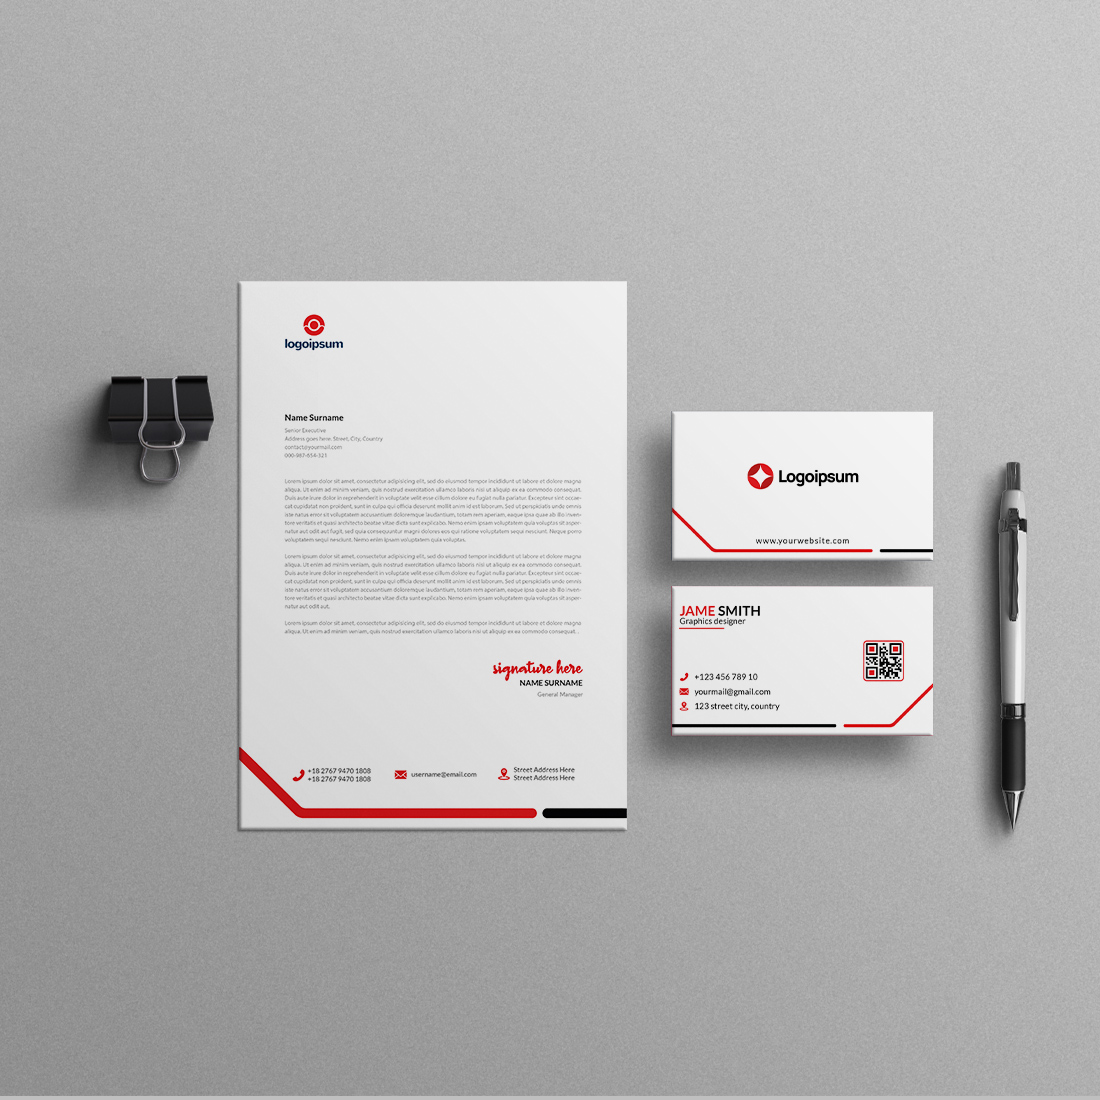 Modern, Minimal, and Professional Business Card And Letterhead Template Design cover image.